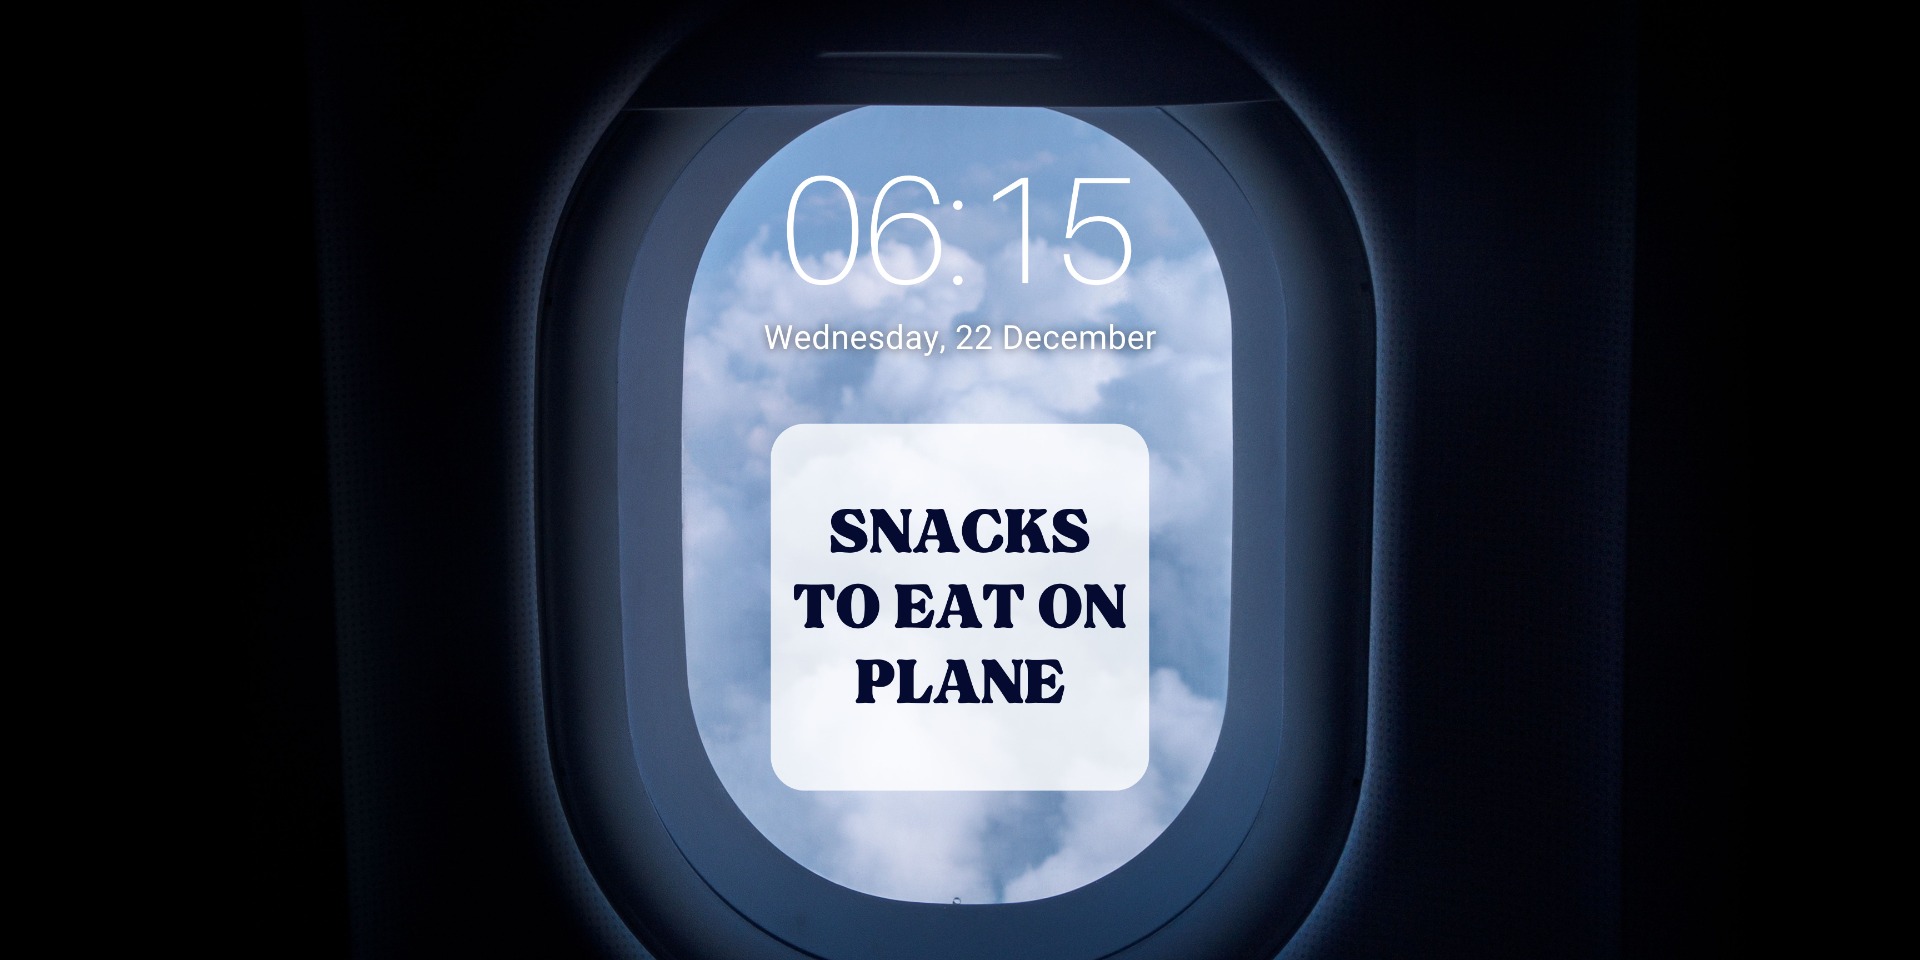 Snacks to Eat on Plane